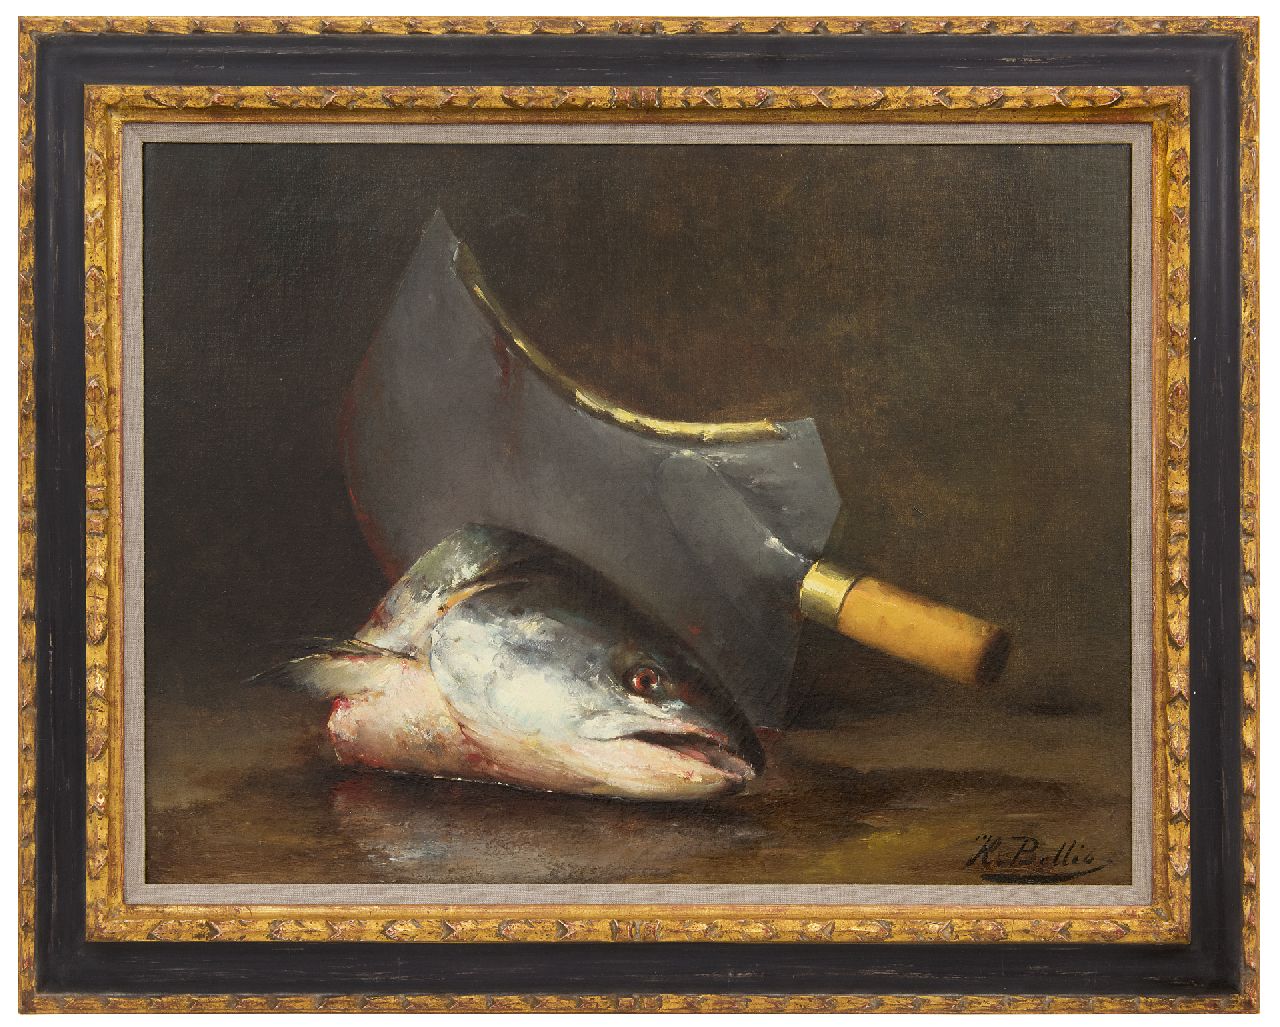 Bellis J.L.  | Josse-Lambert 'Hubert' Bellis | Paintings offered for sale | A still life with a fish head and cleaver, oil on canvas 47.2 x 63.0 cm, signed l.r.